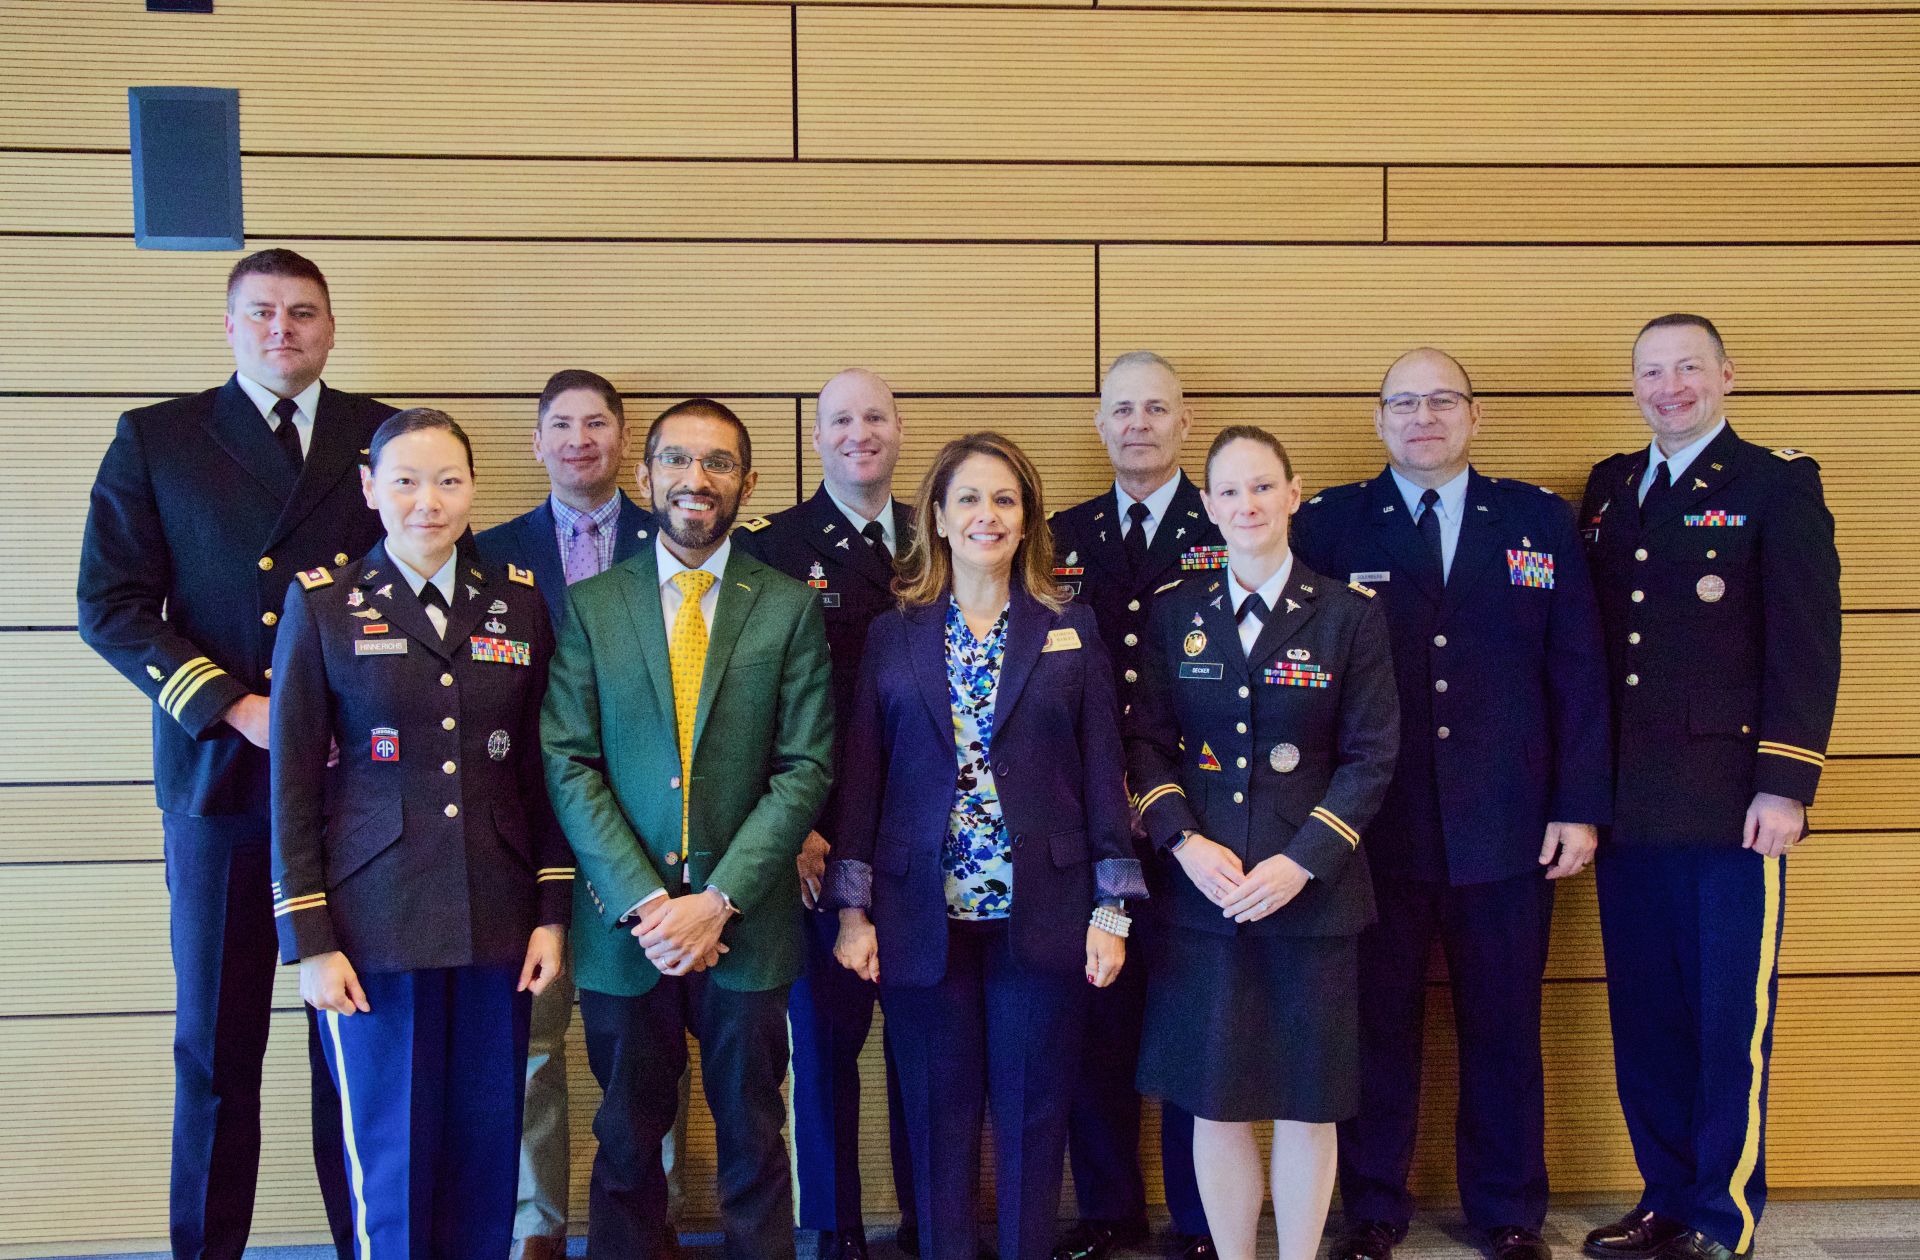 Group Image of Army-Baylor faculty with Dean Dr. Mazumder